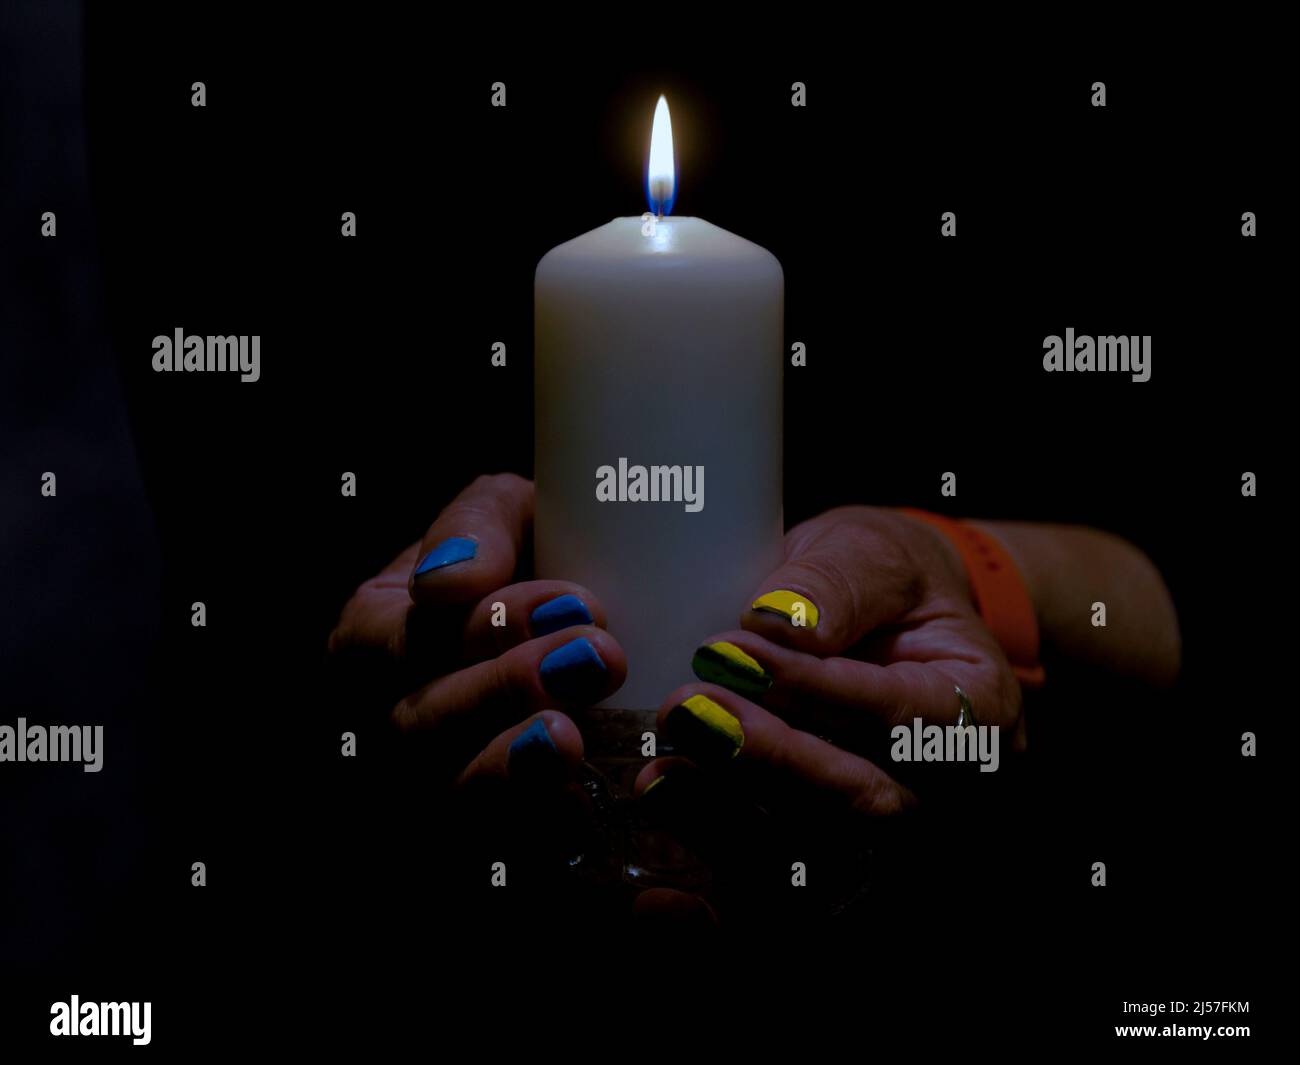 The flame of a white candle in the dark held by a woman. A woman's nails are painted blue and yellow. Stock Photo